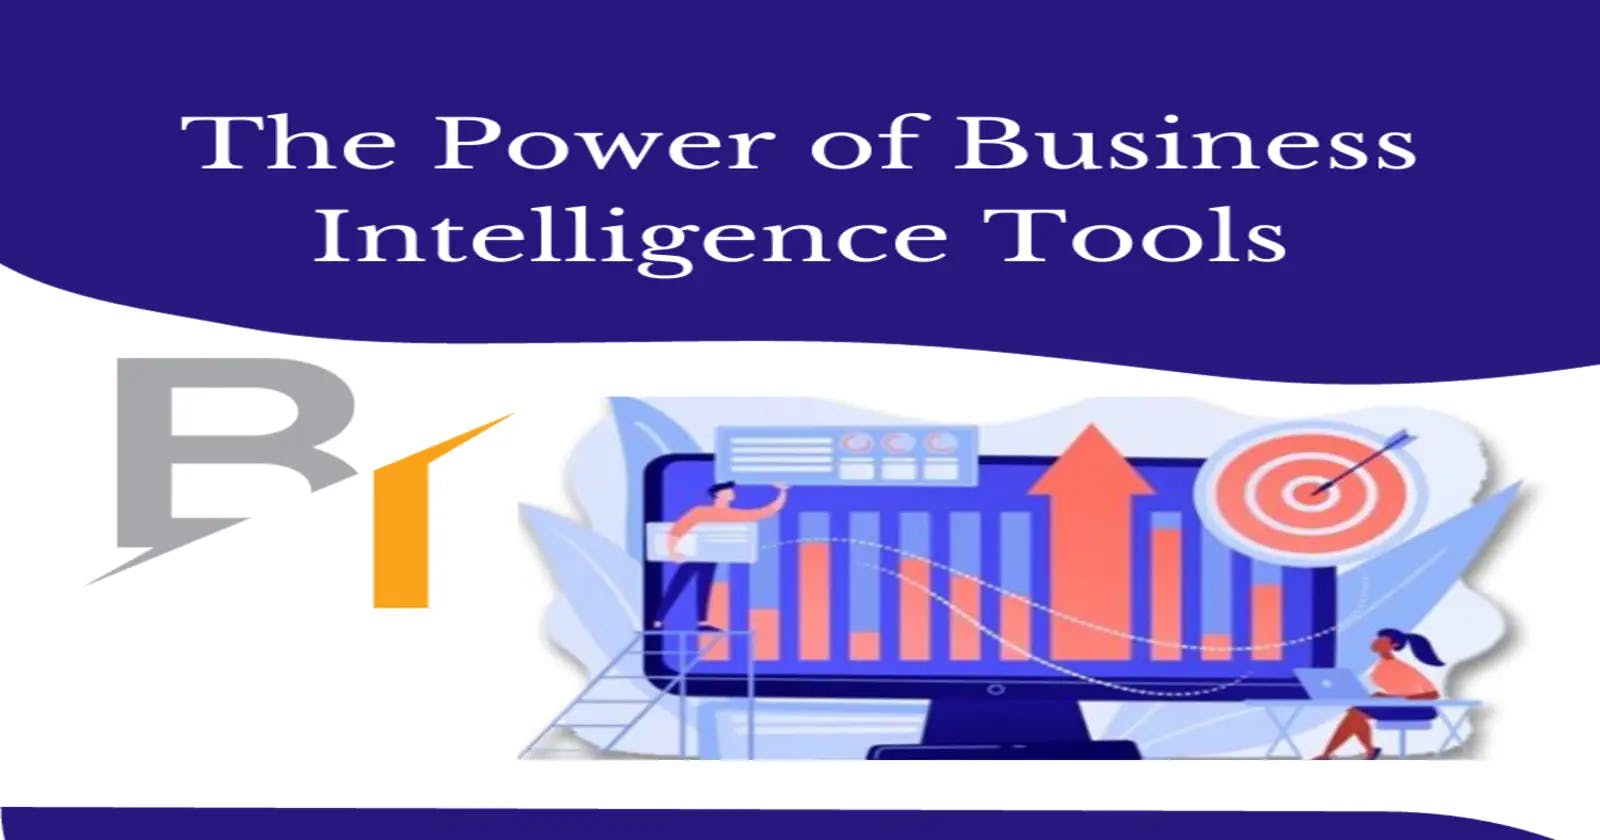 The Power of Business Intelligence Tools